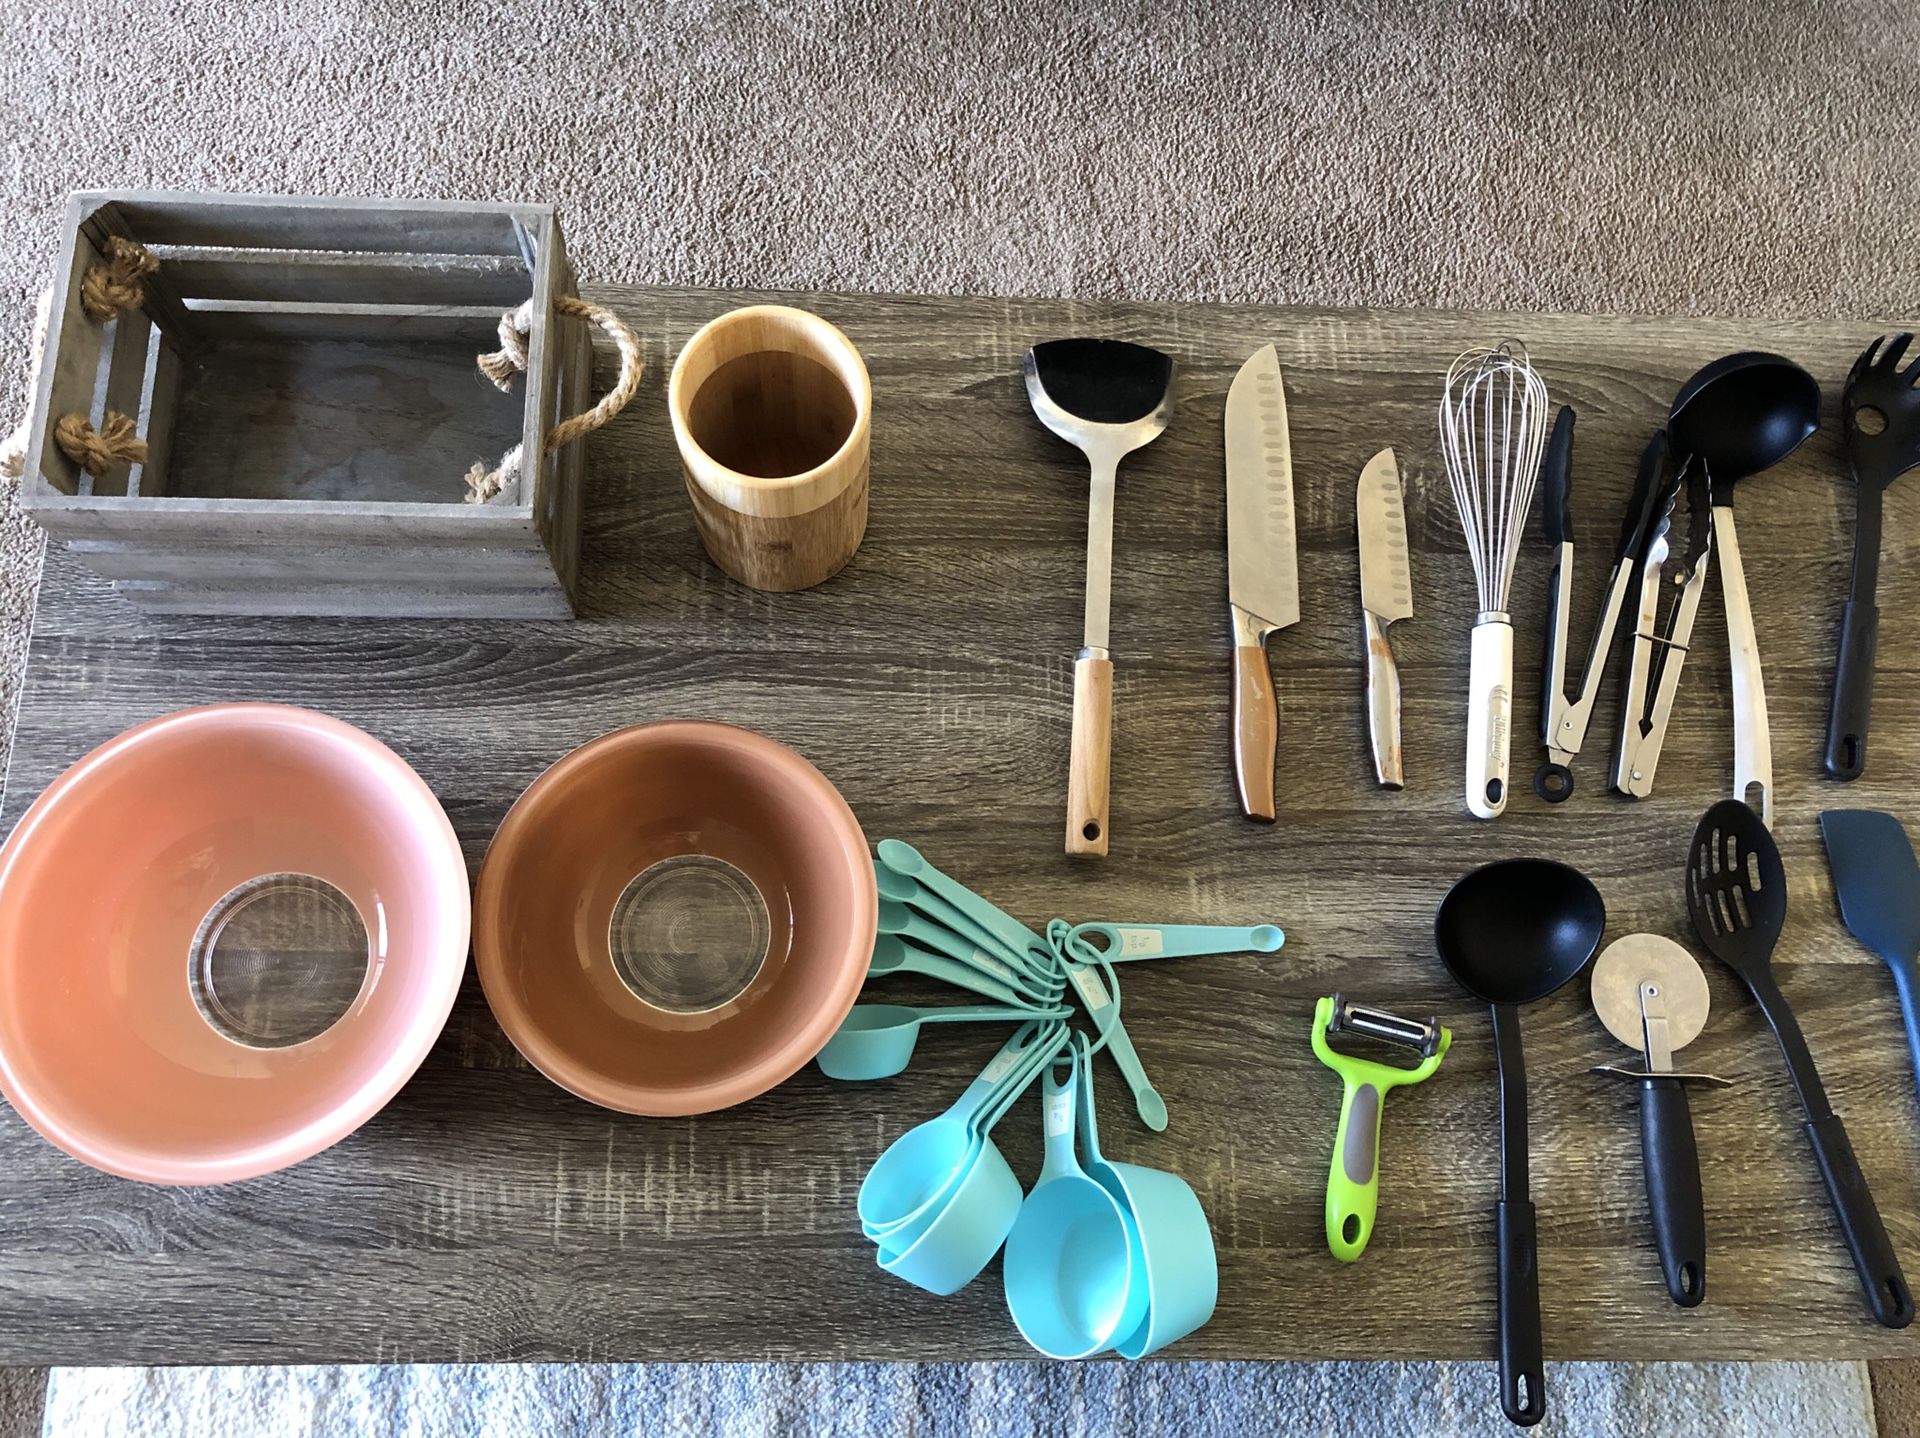 Kitchen Stuff: Utensils, Bowls, Knives and Wooden Crate